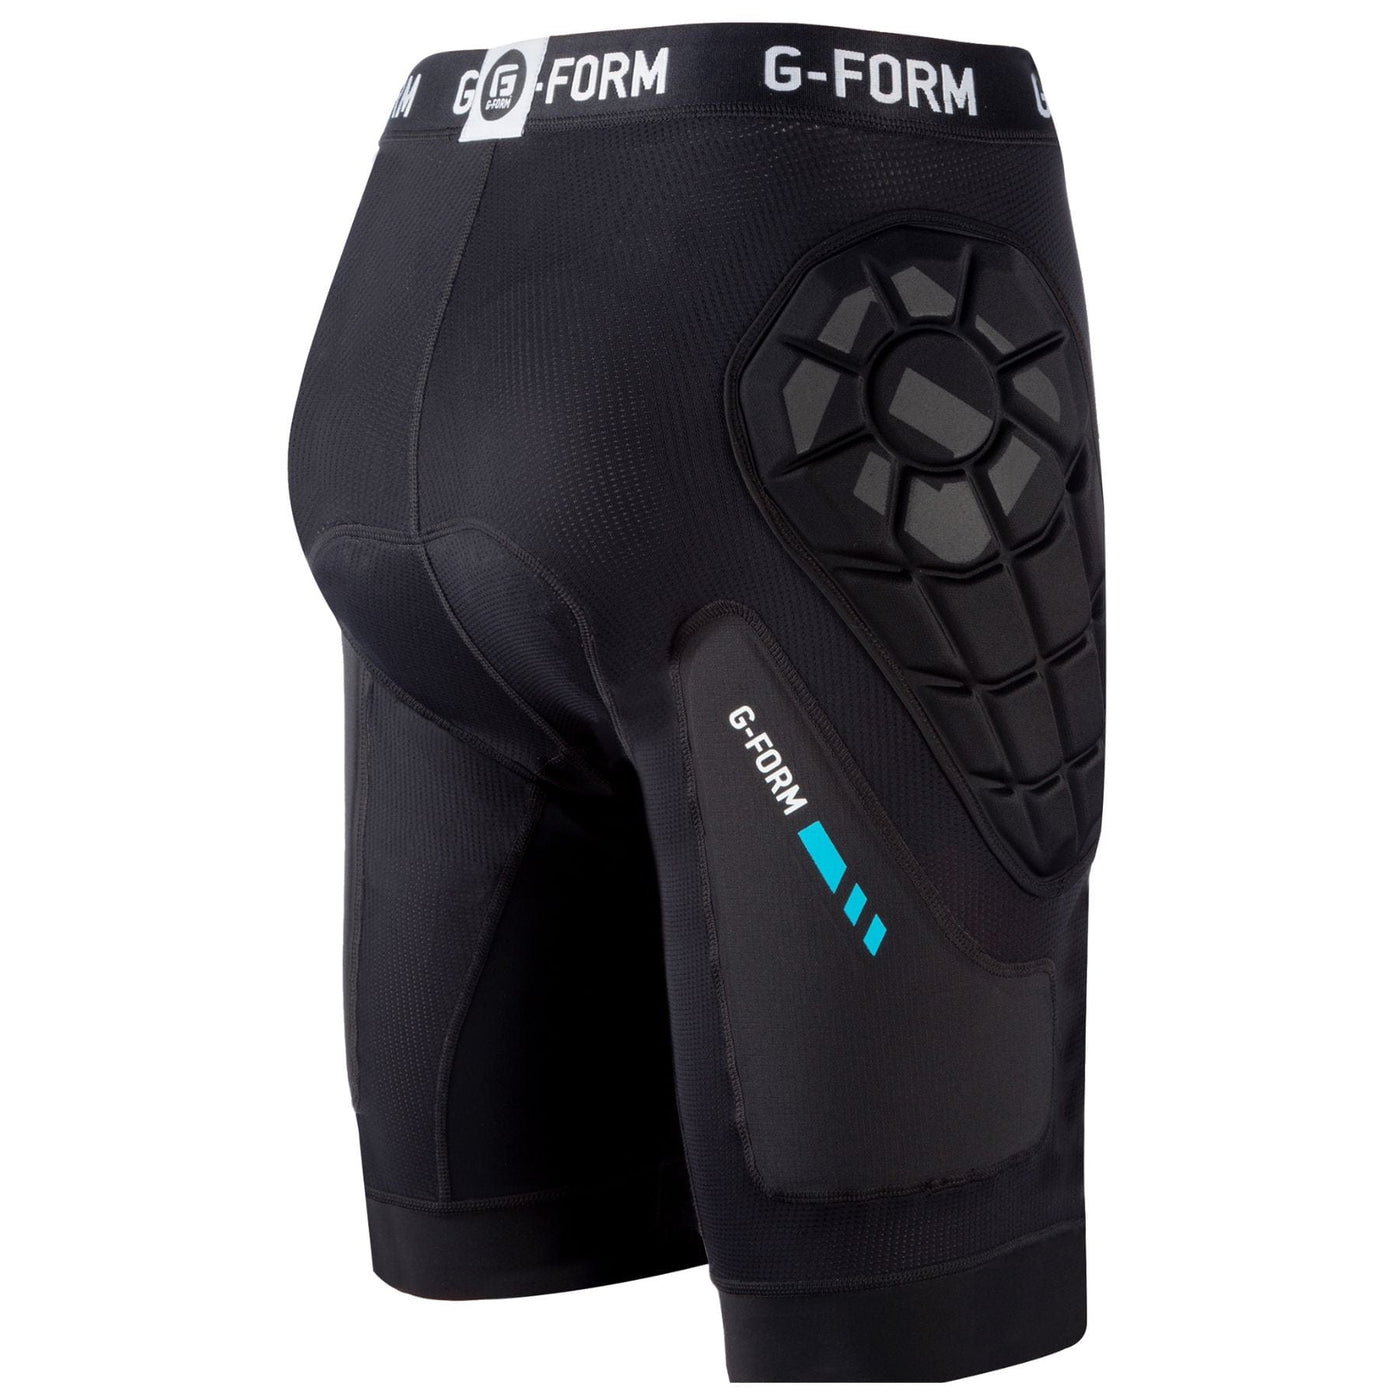 G-Form Motocross Padded Shorts - Black 8Lines Shop - Fast Shipping